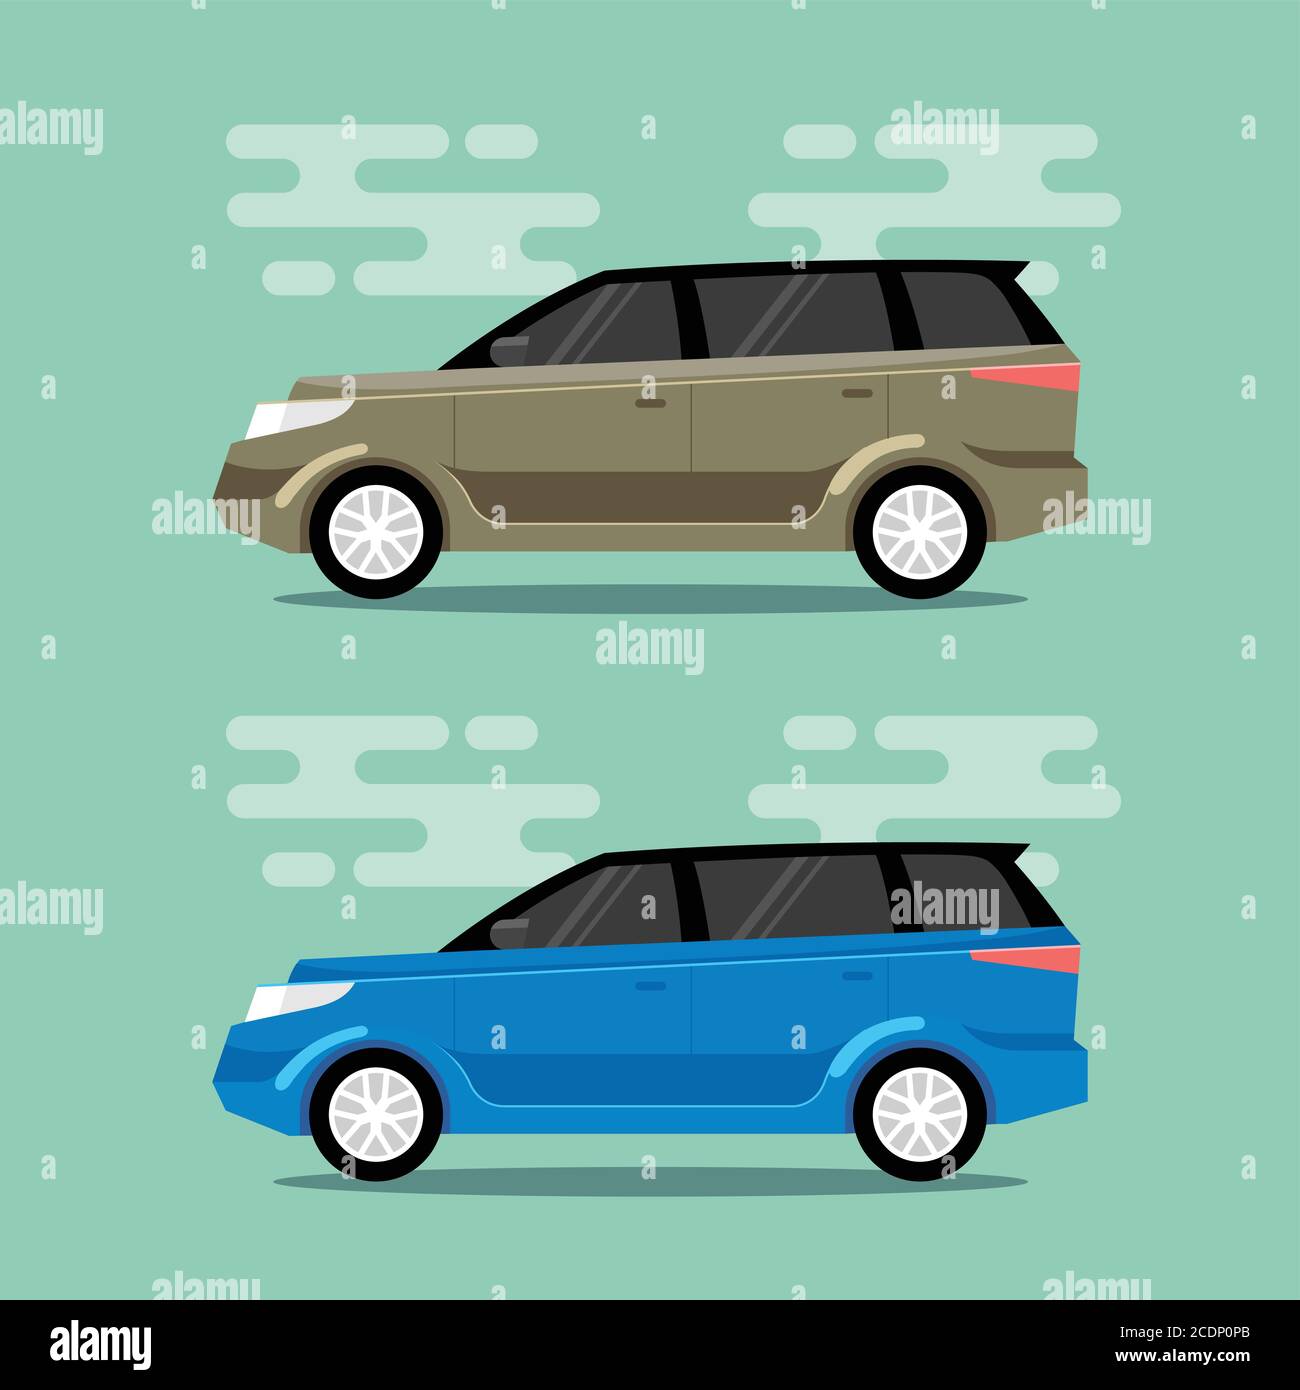 Beige and blue cars in flat color style. Sport utility vehicle transportation icons. Vector illustrations. Stock Vector